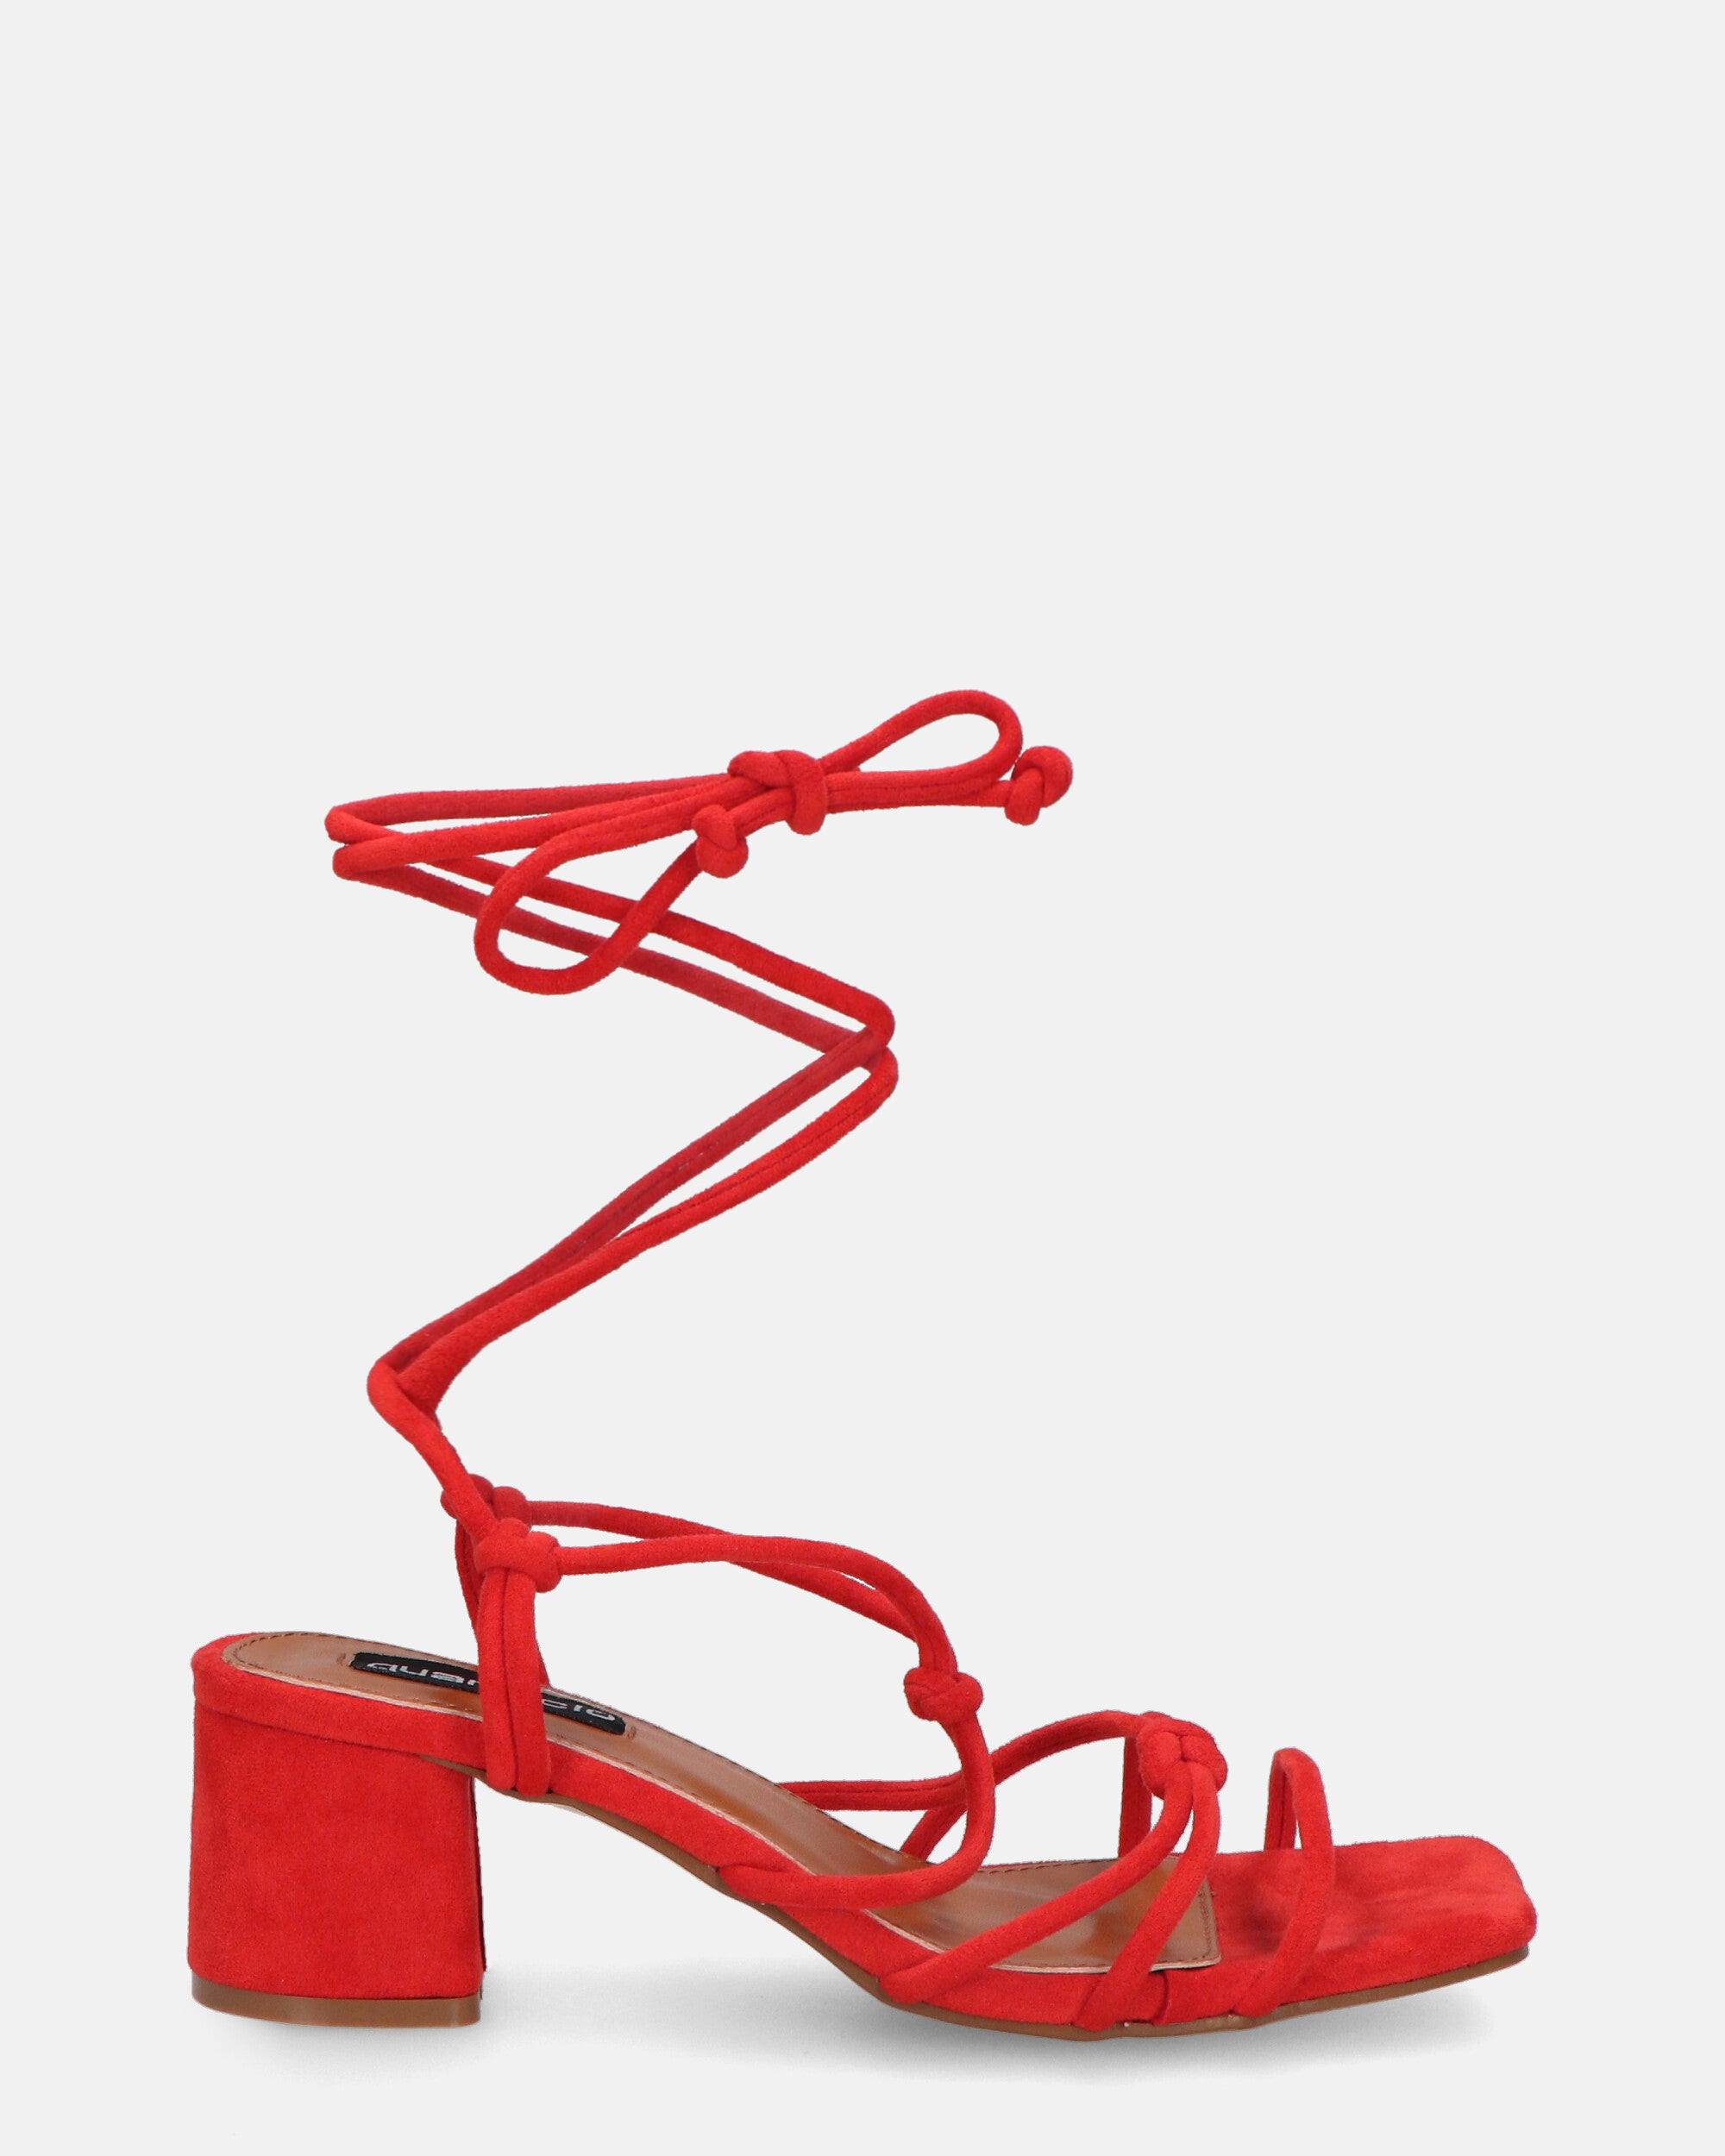 NAKI - red suede sandals with heel and laces